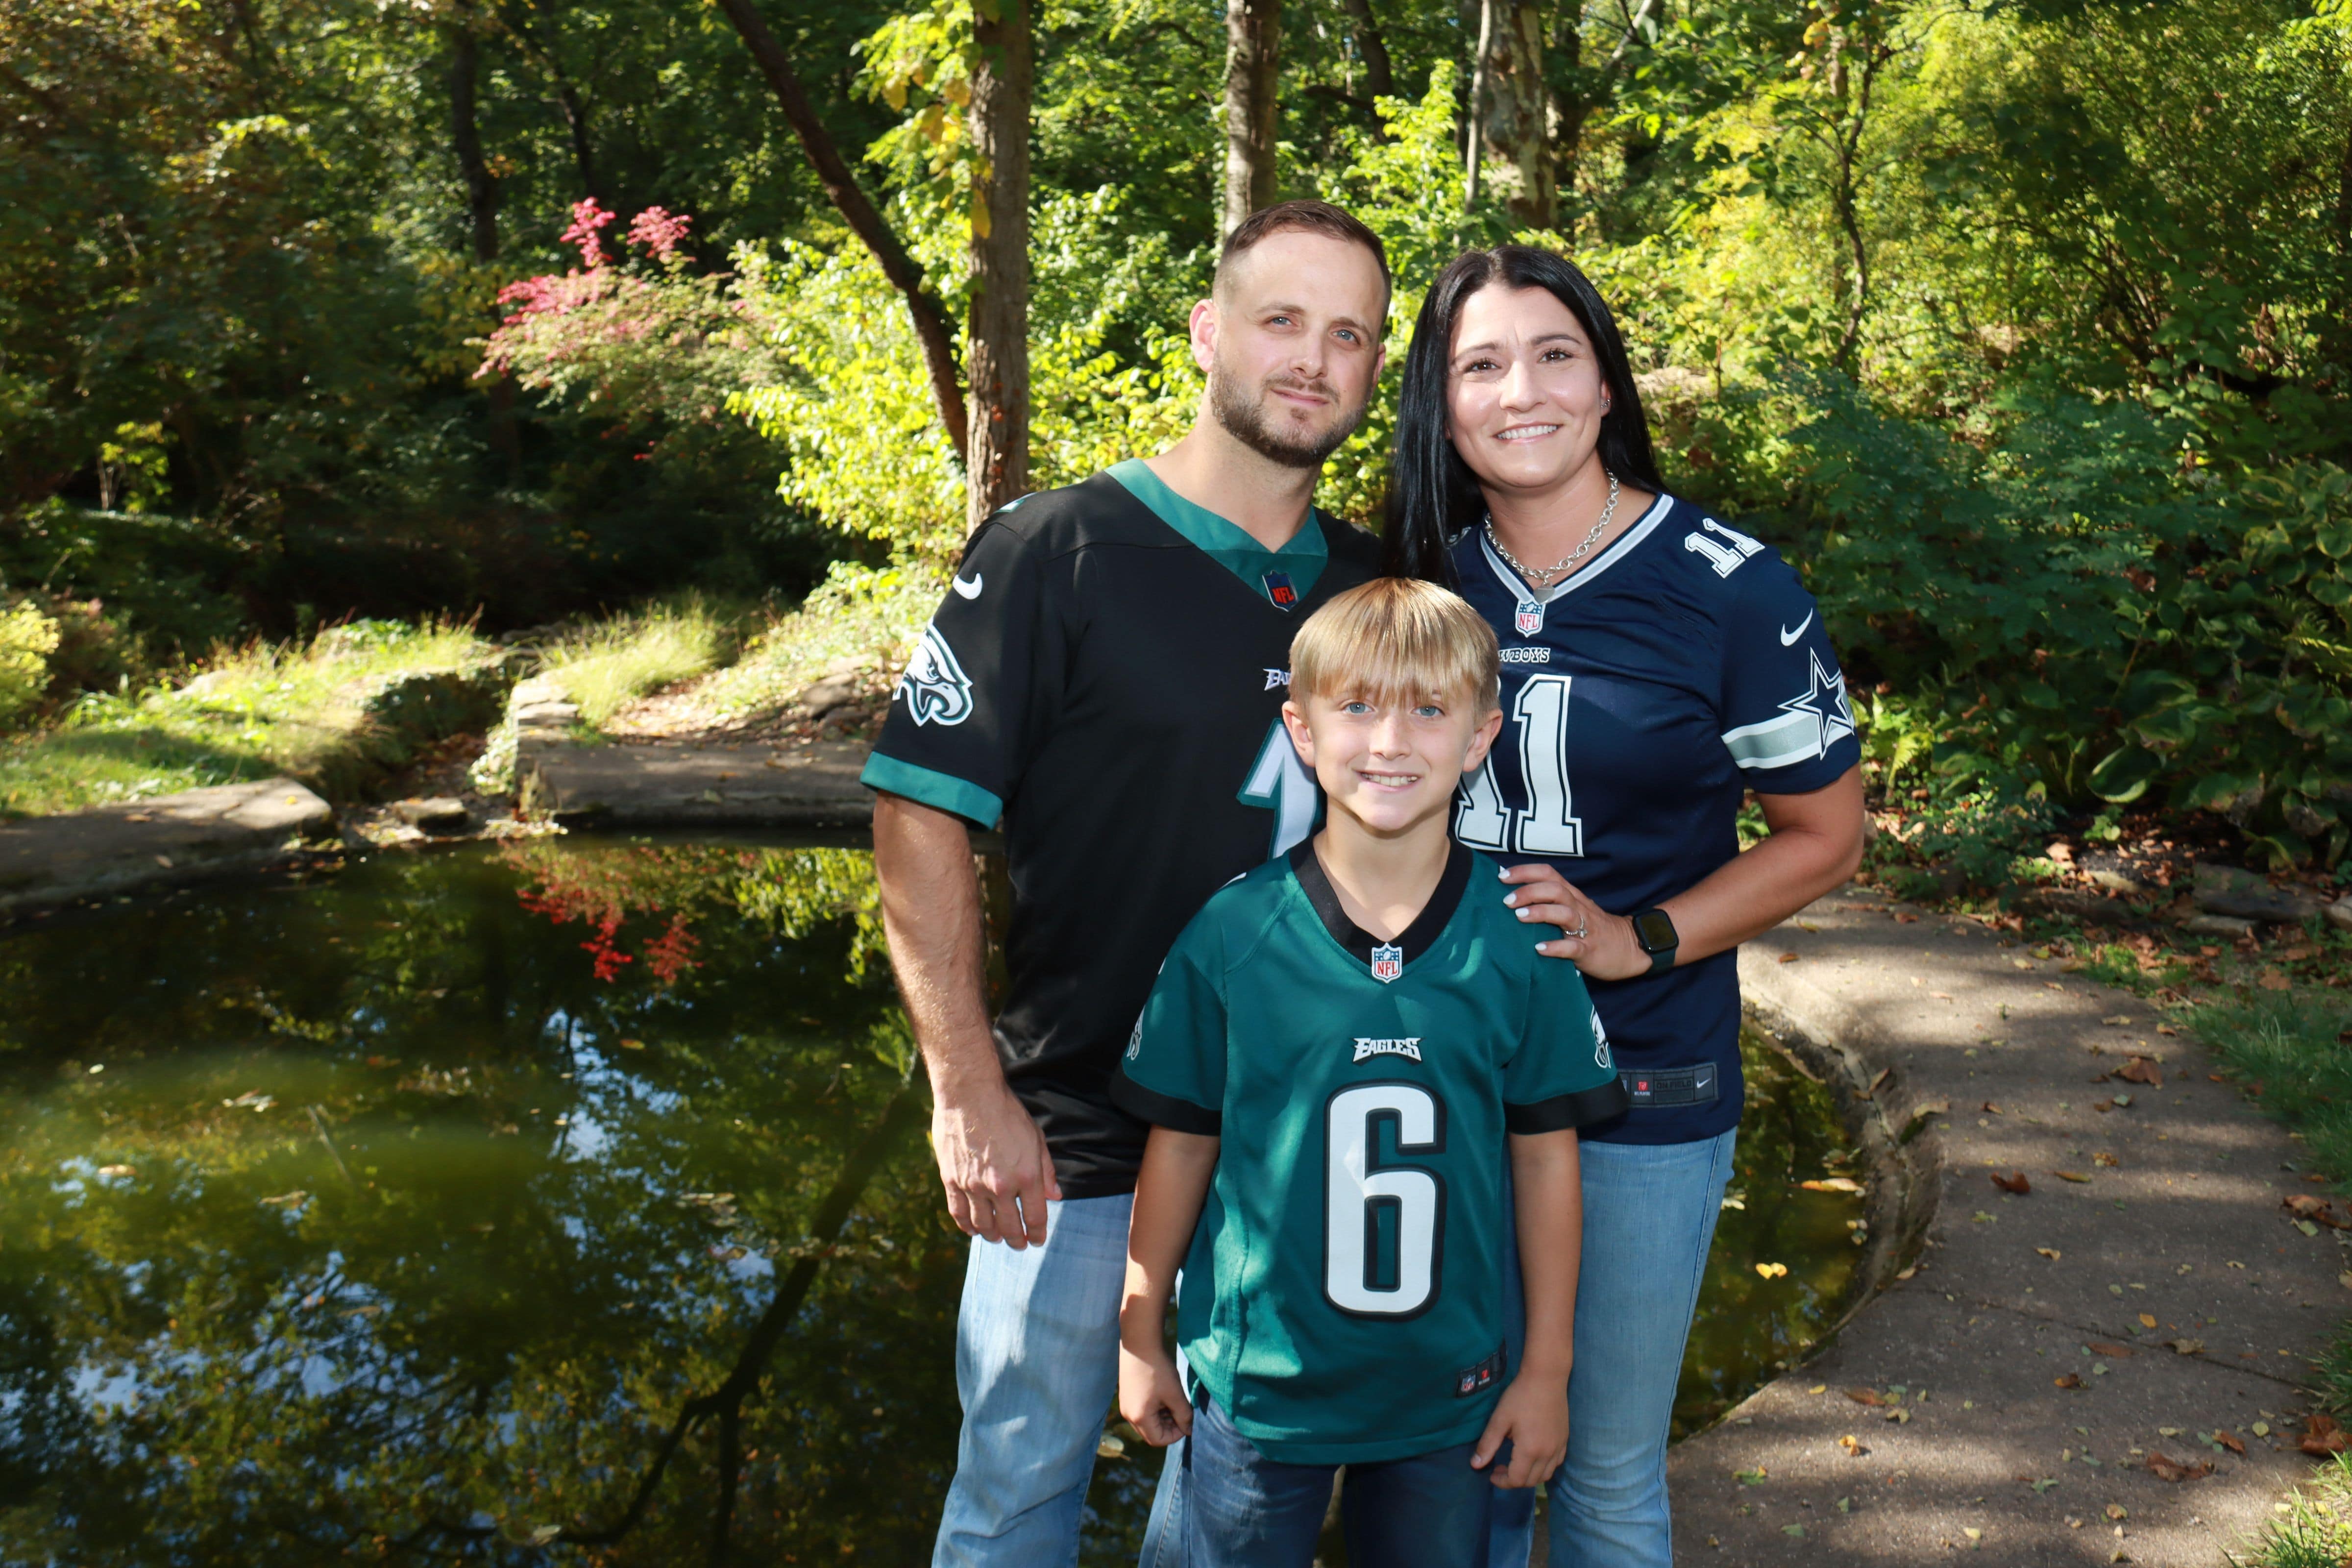 Bucks County Family Photography Portrait Sessions with Angel Clausson at Tylerstar Productions.